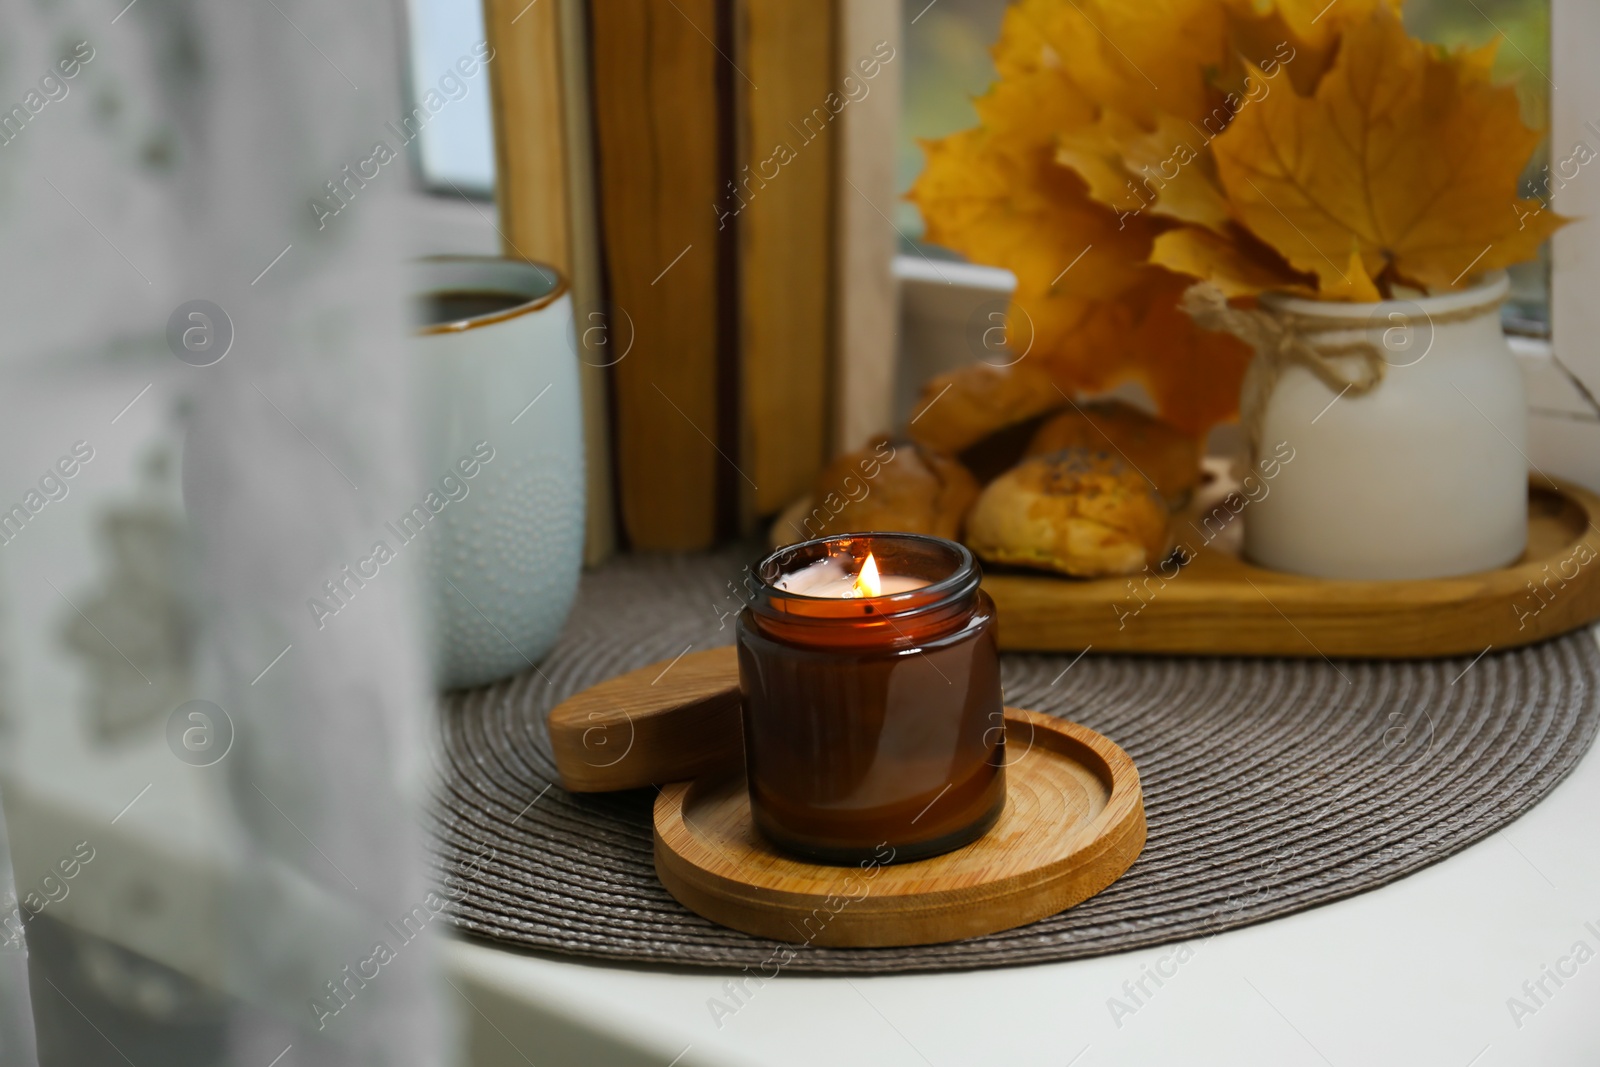 Photo of Burning aromatic candle near cup with hot drink, books, cookies and leaves on wicker mat. Autumn coziness